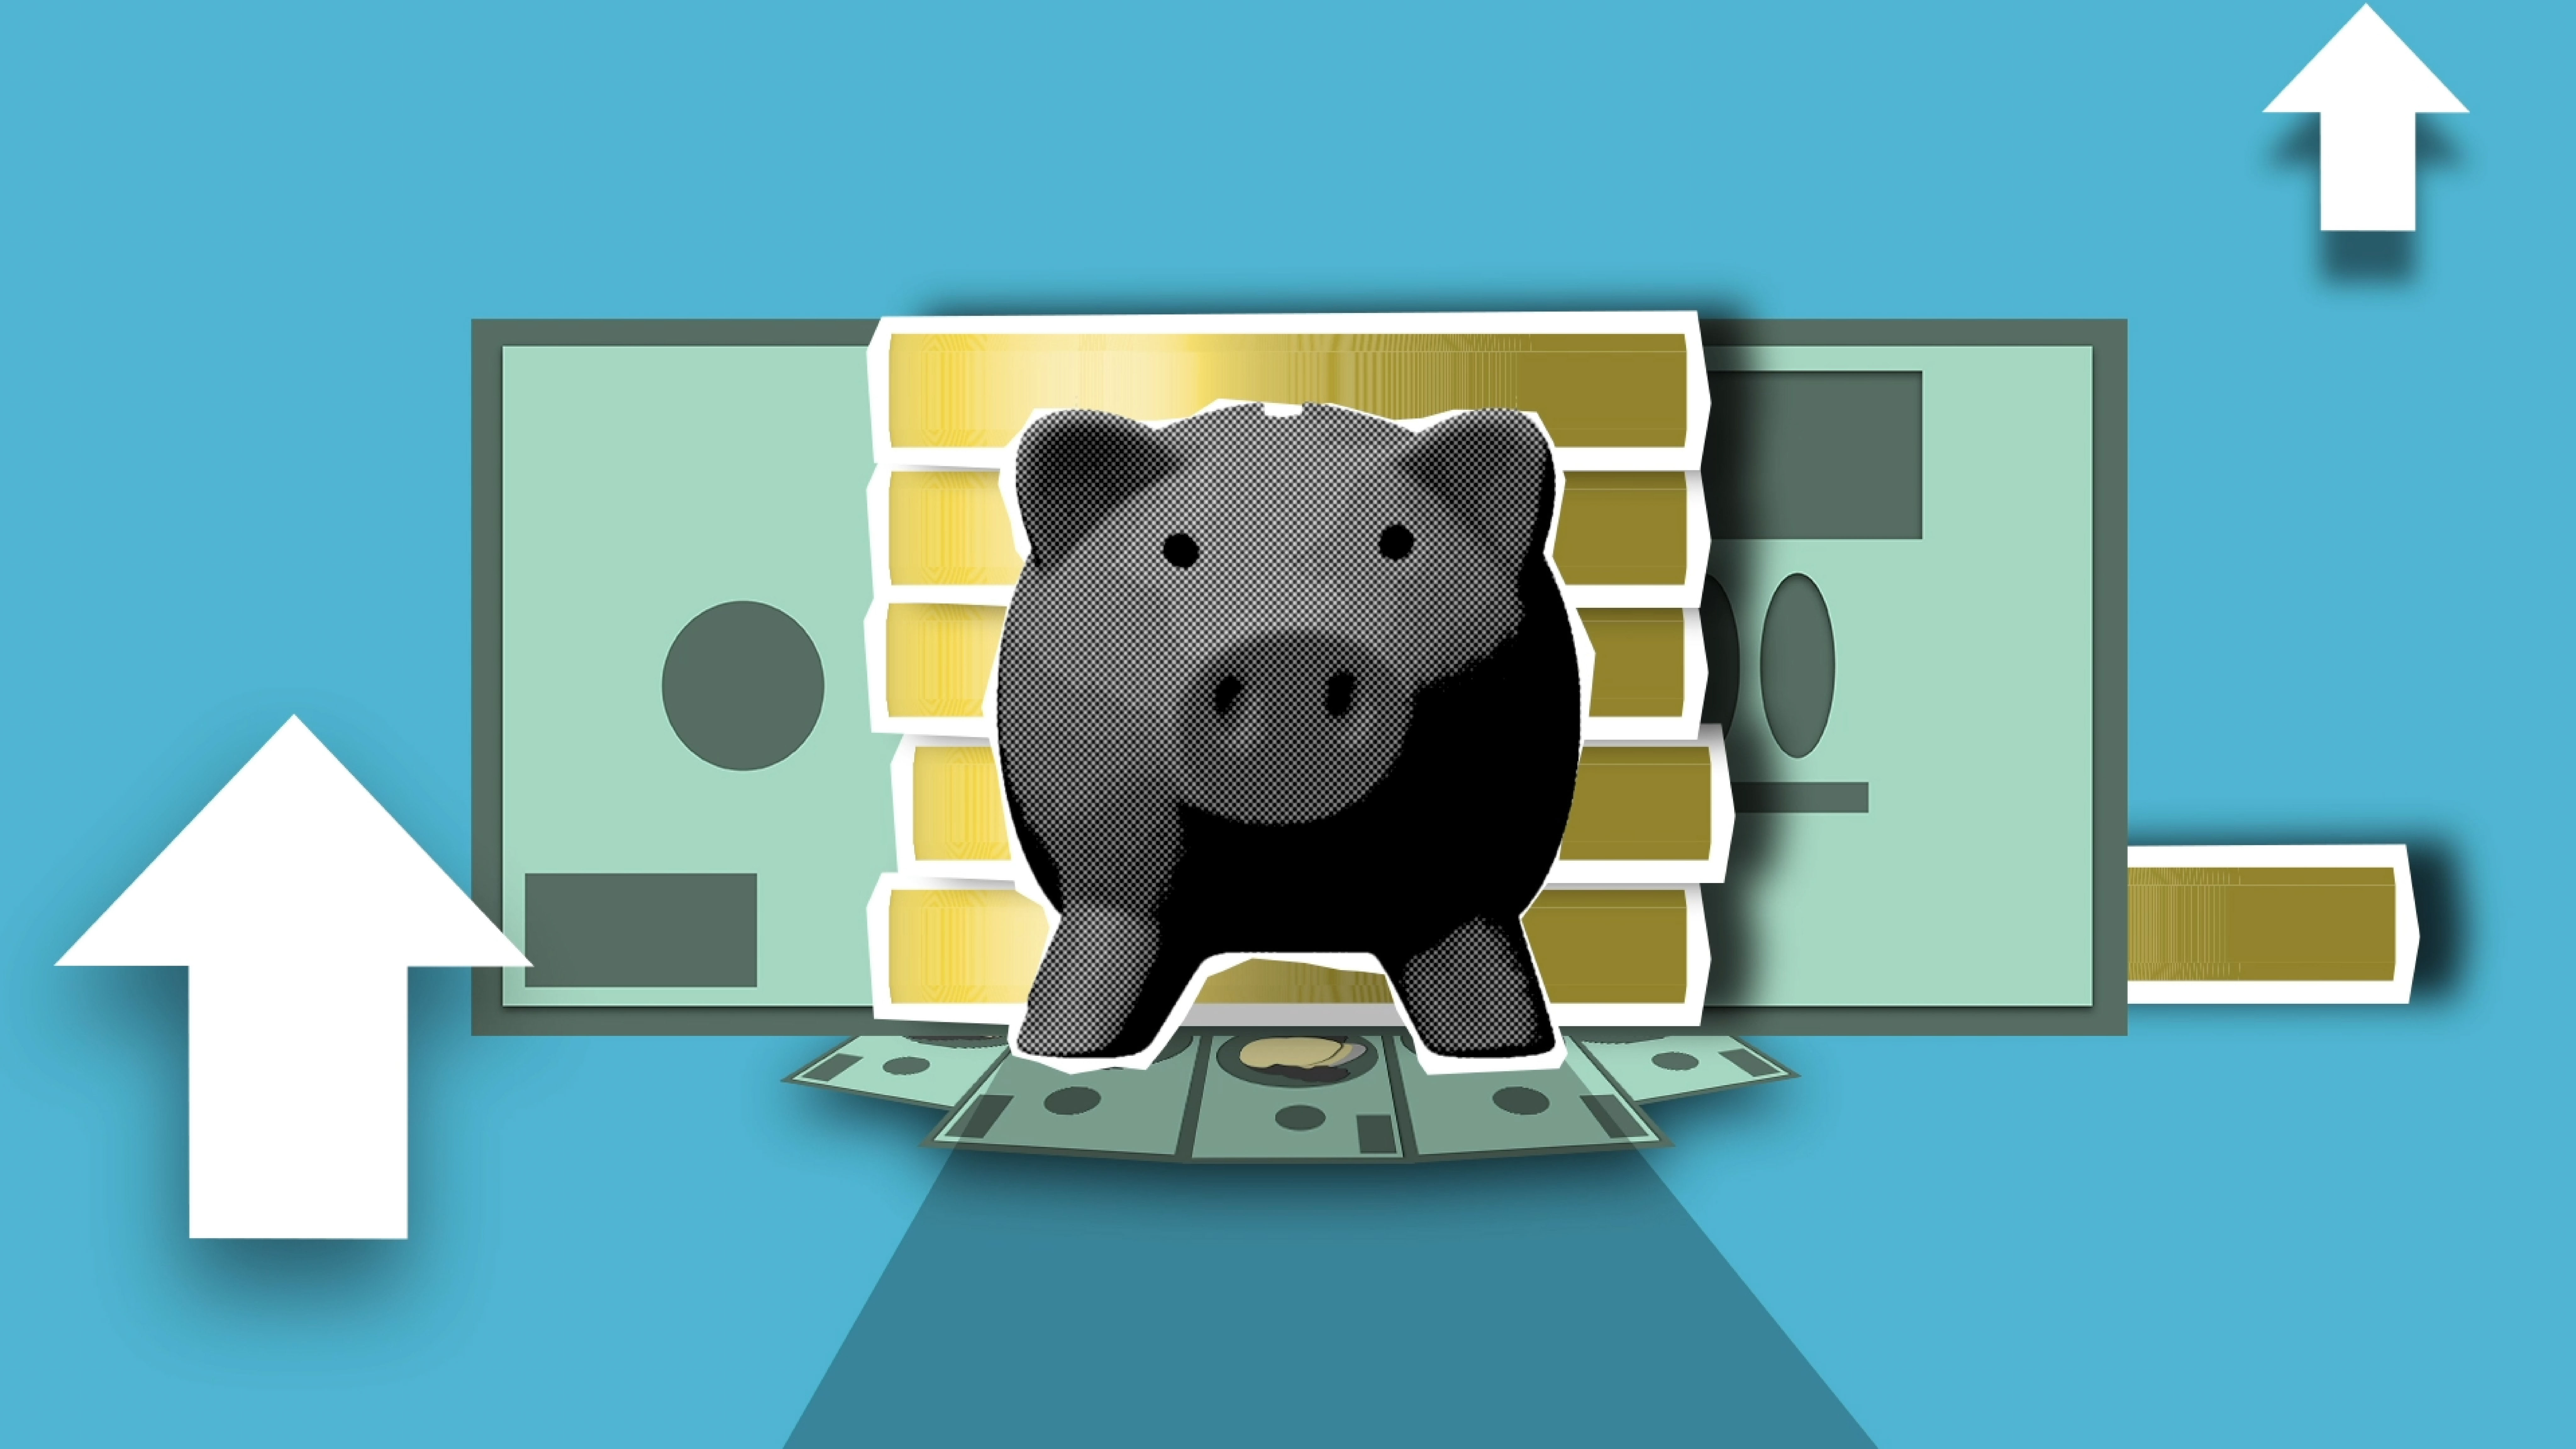 Digital image of piggy bank standing on stack of coins.